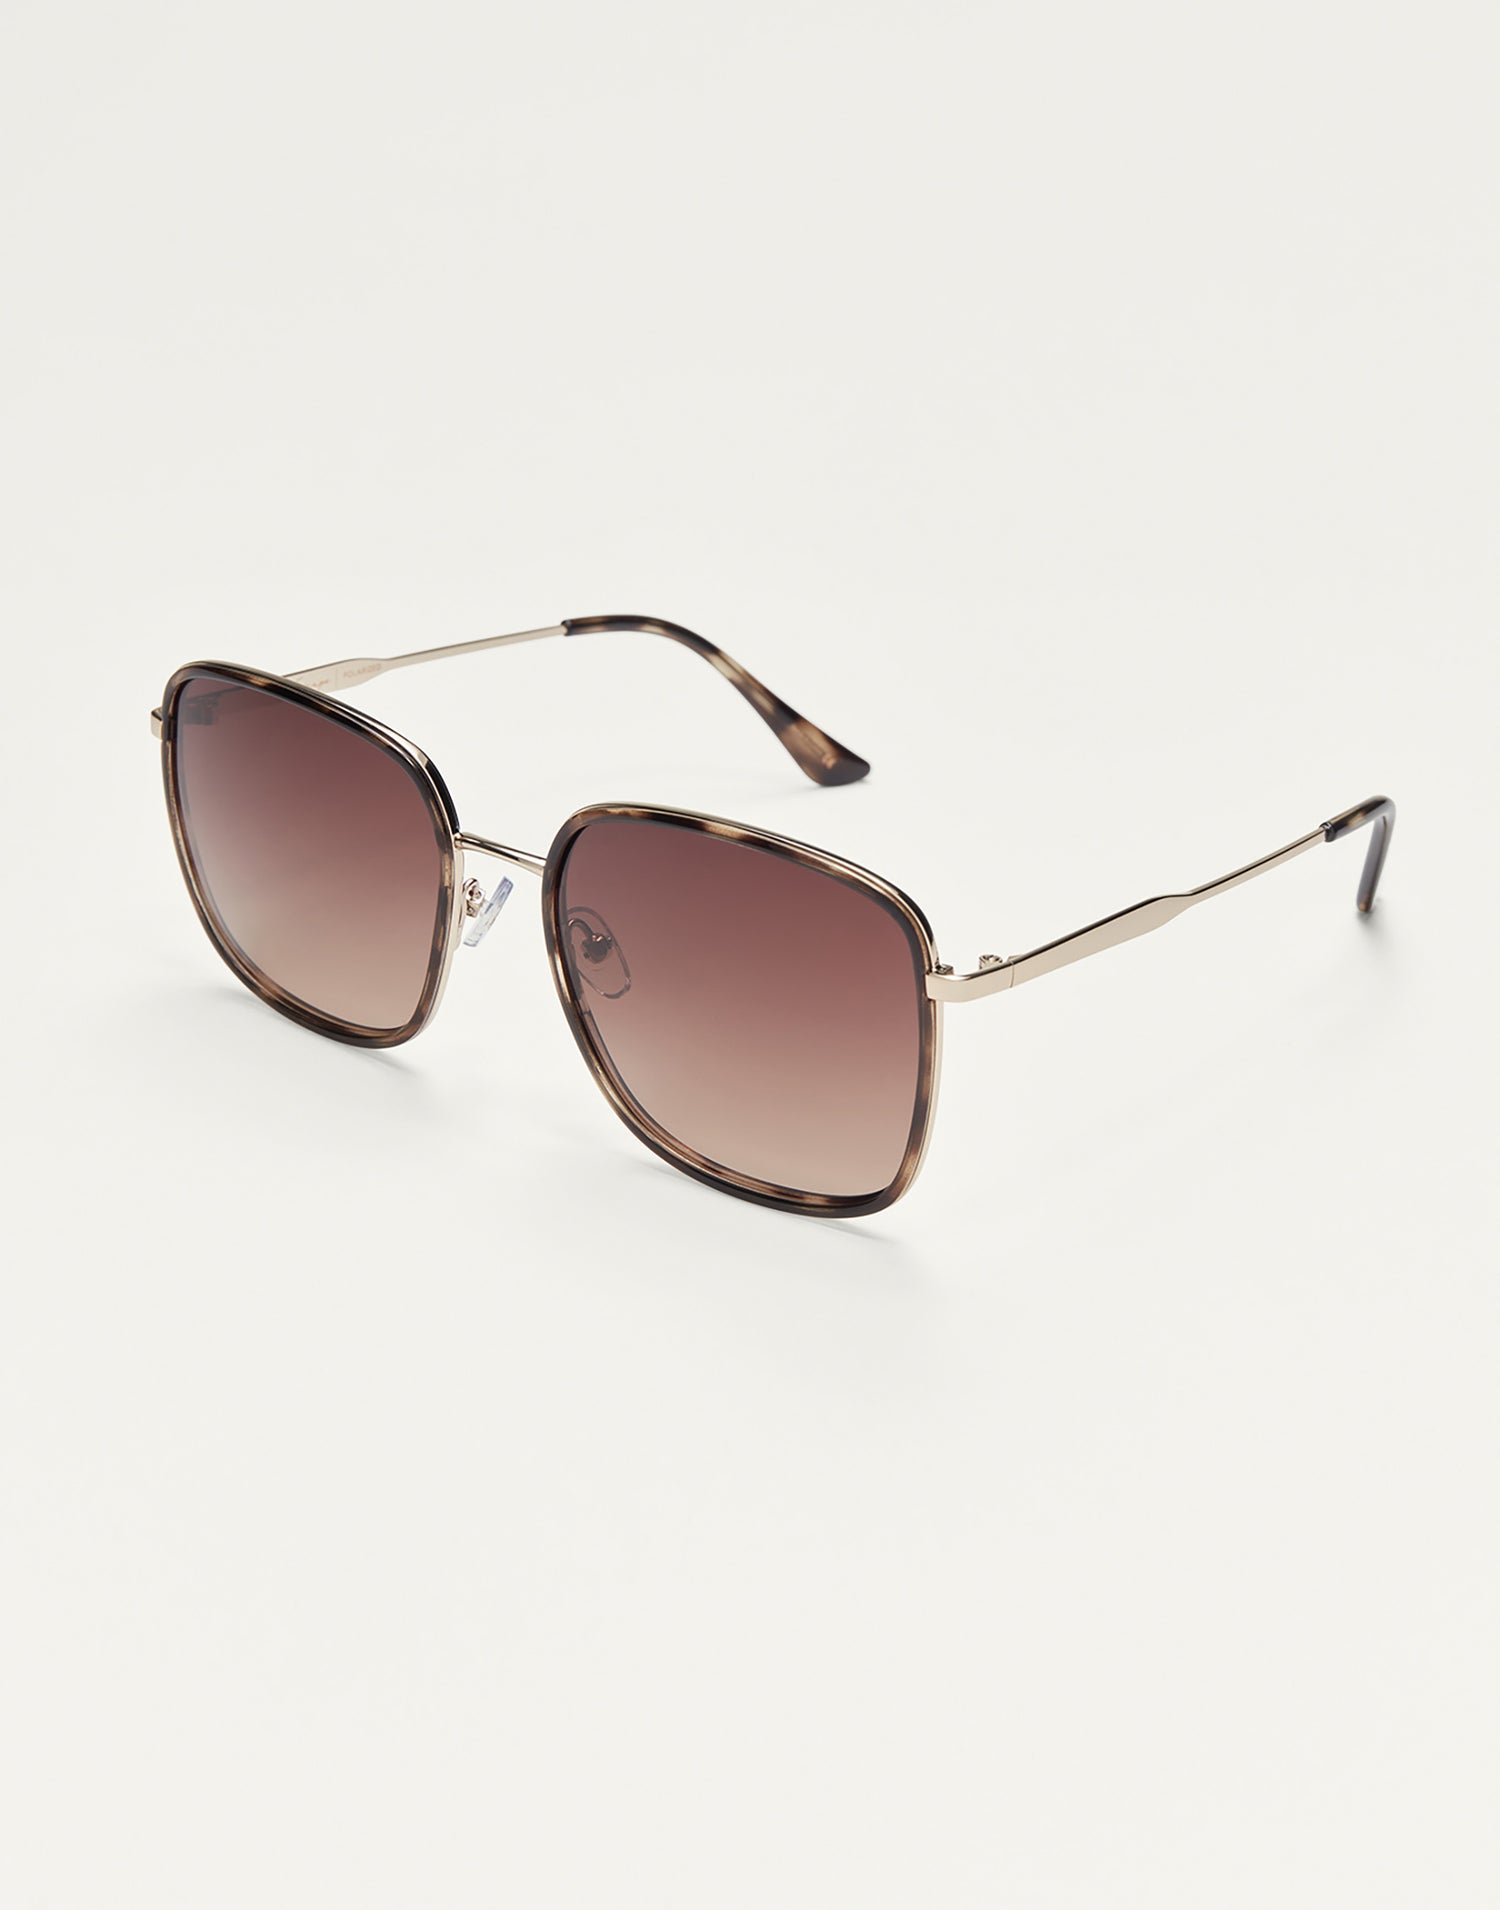 Escape Sunglasses by Z Supply in Brown Tortoise - Angled View